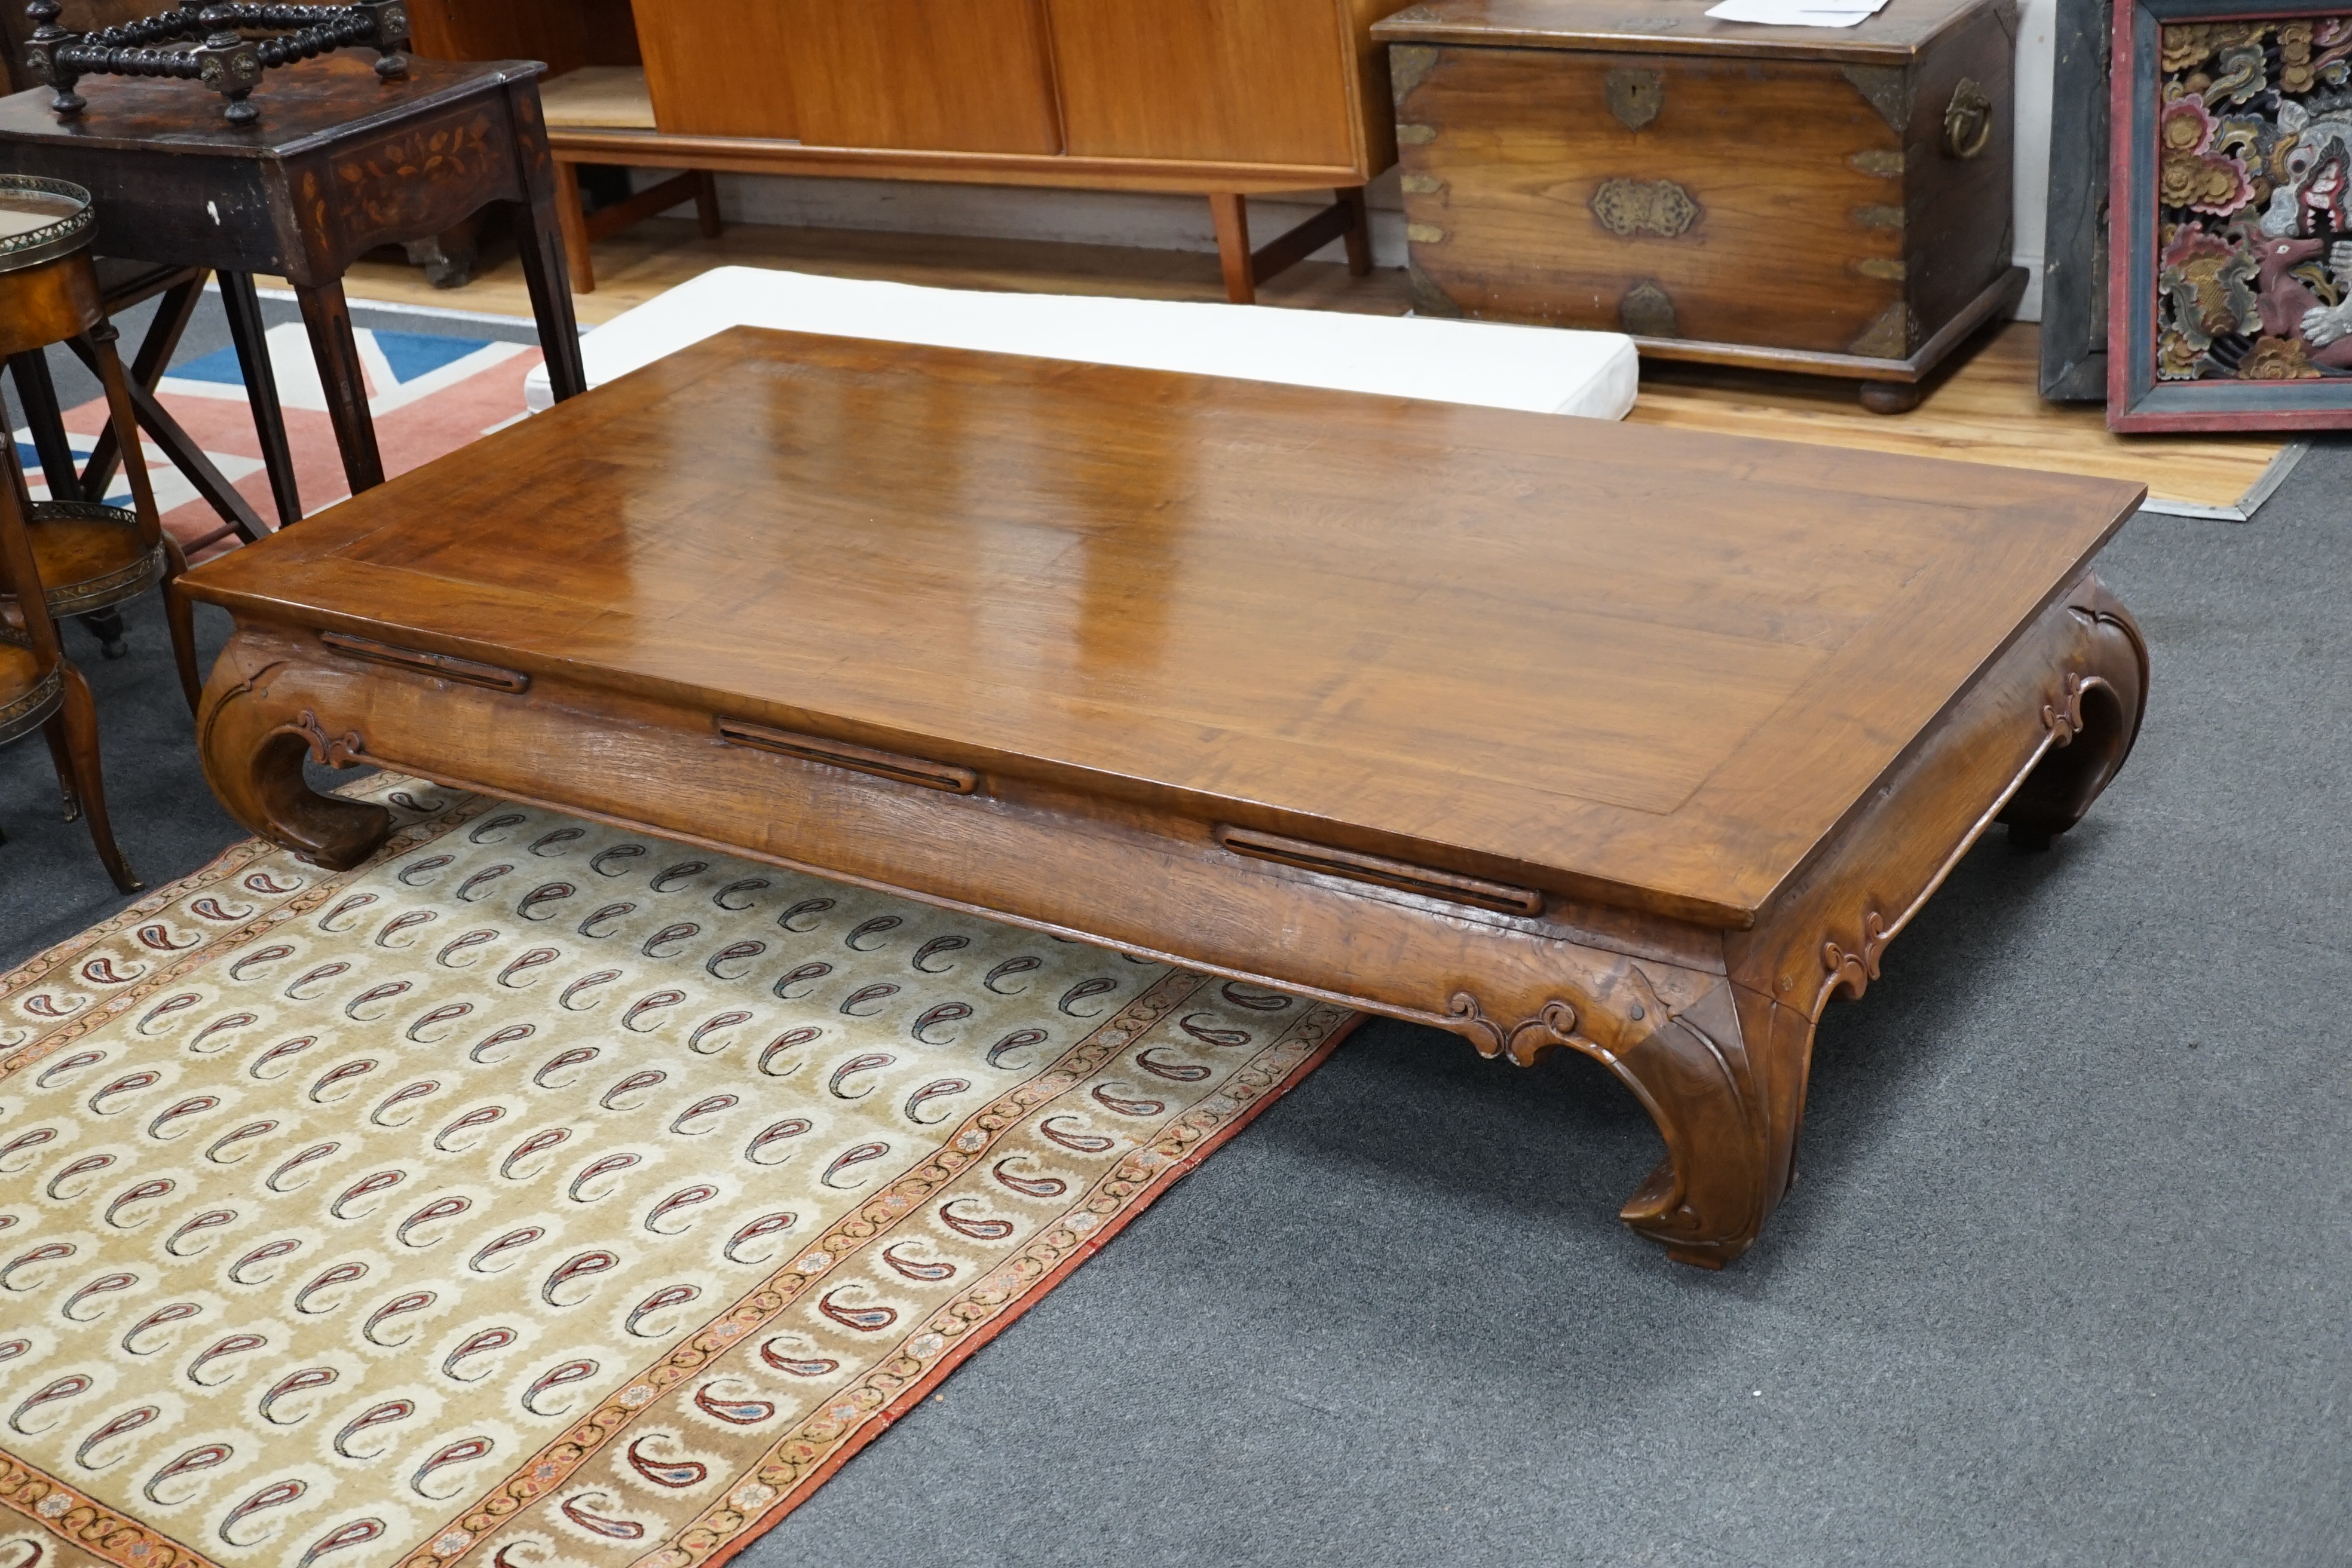 A large Chinese rectangular hardwood coffee table, length 180cm, width 90cm, height 36cm